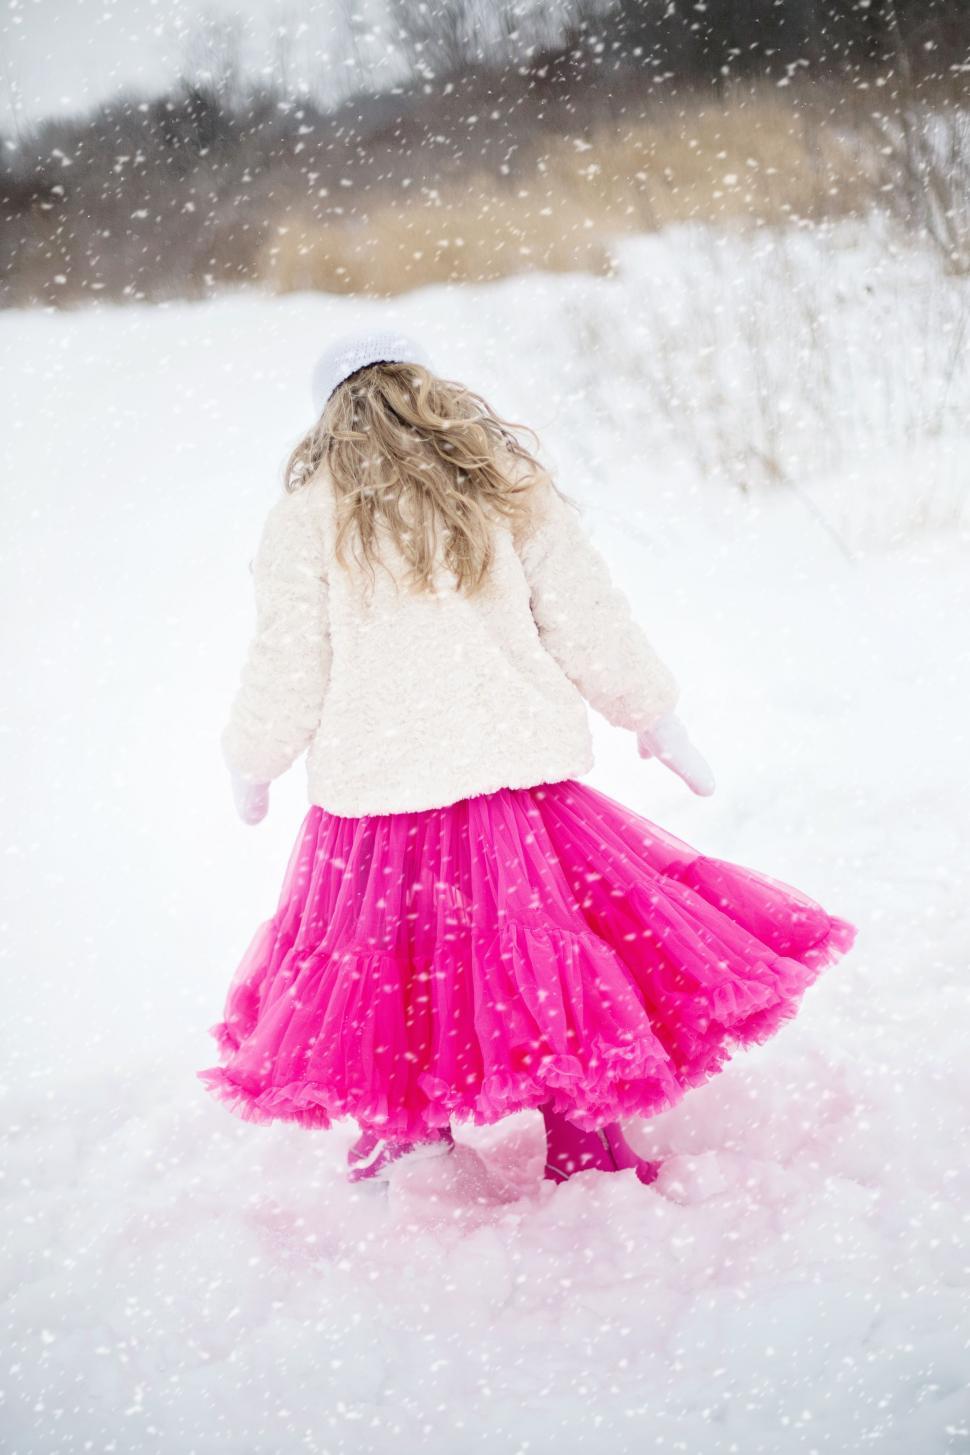 Free Image of Back view of Little Girl with blonde hair and white fur jacket in snow 